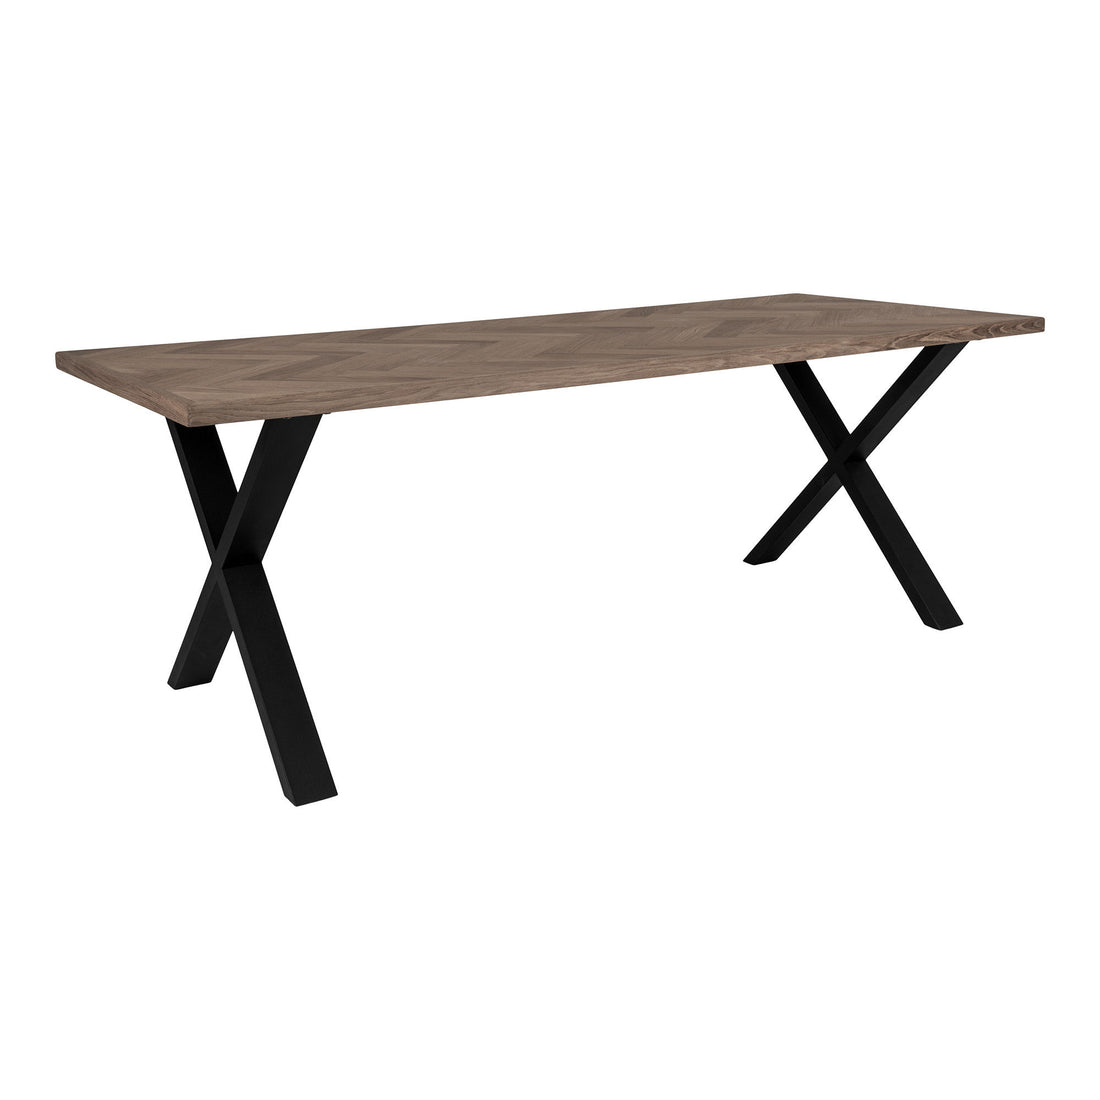 House Nordic Bordeaux Dining Table